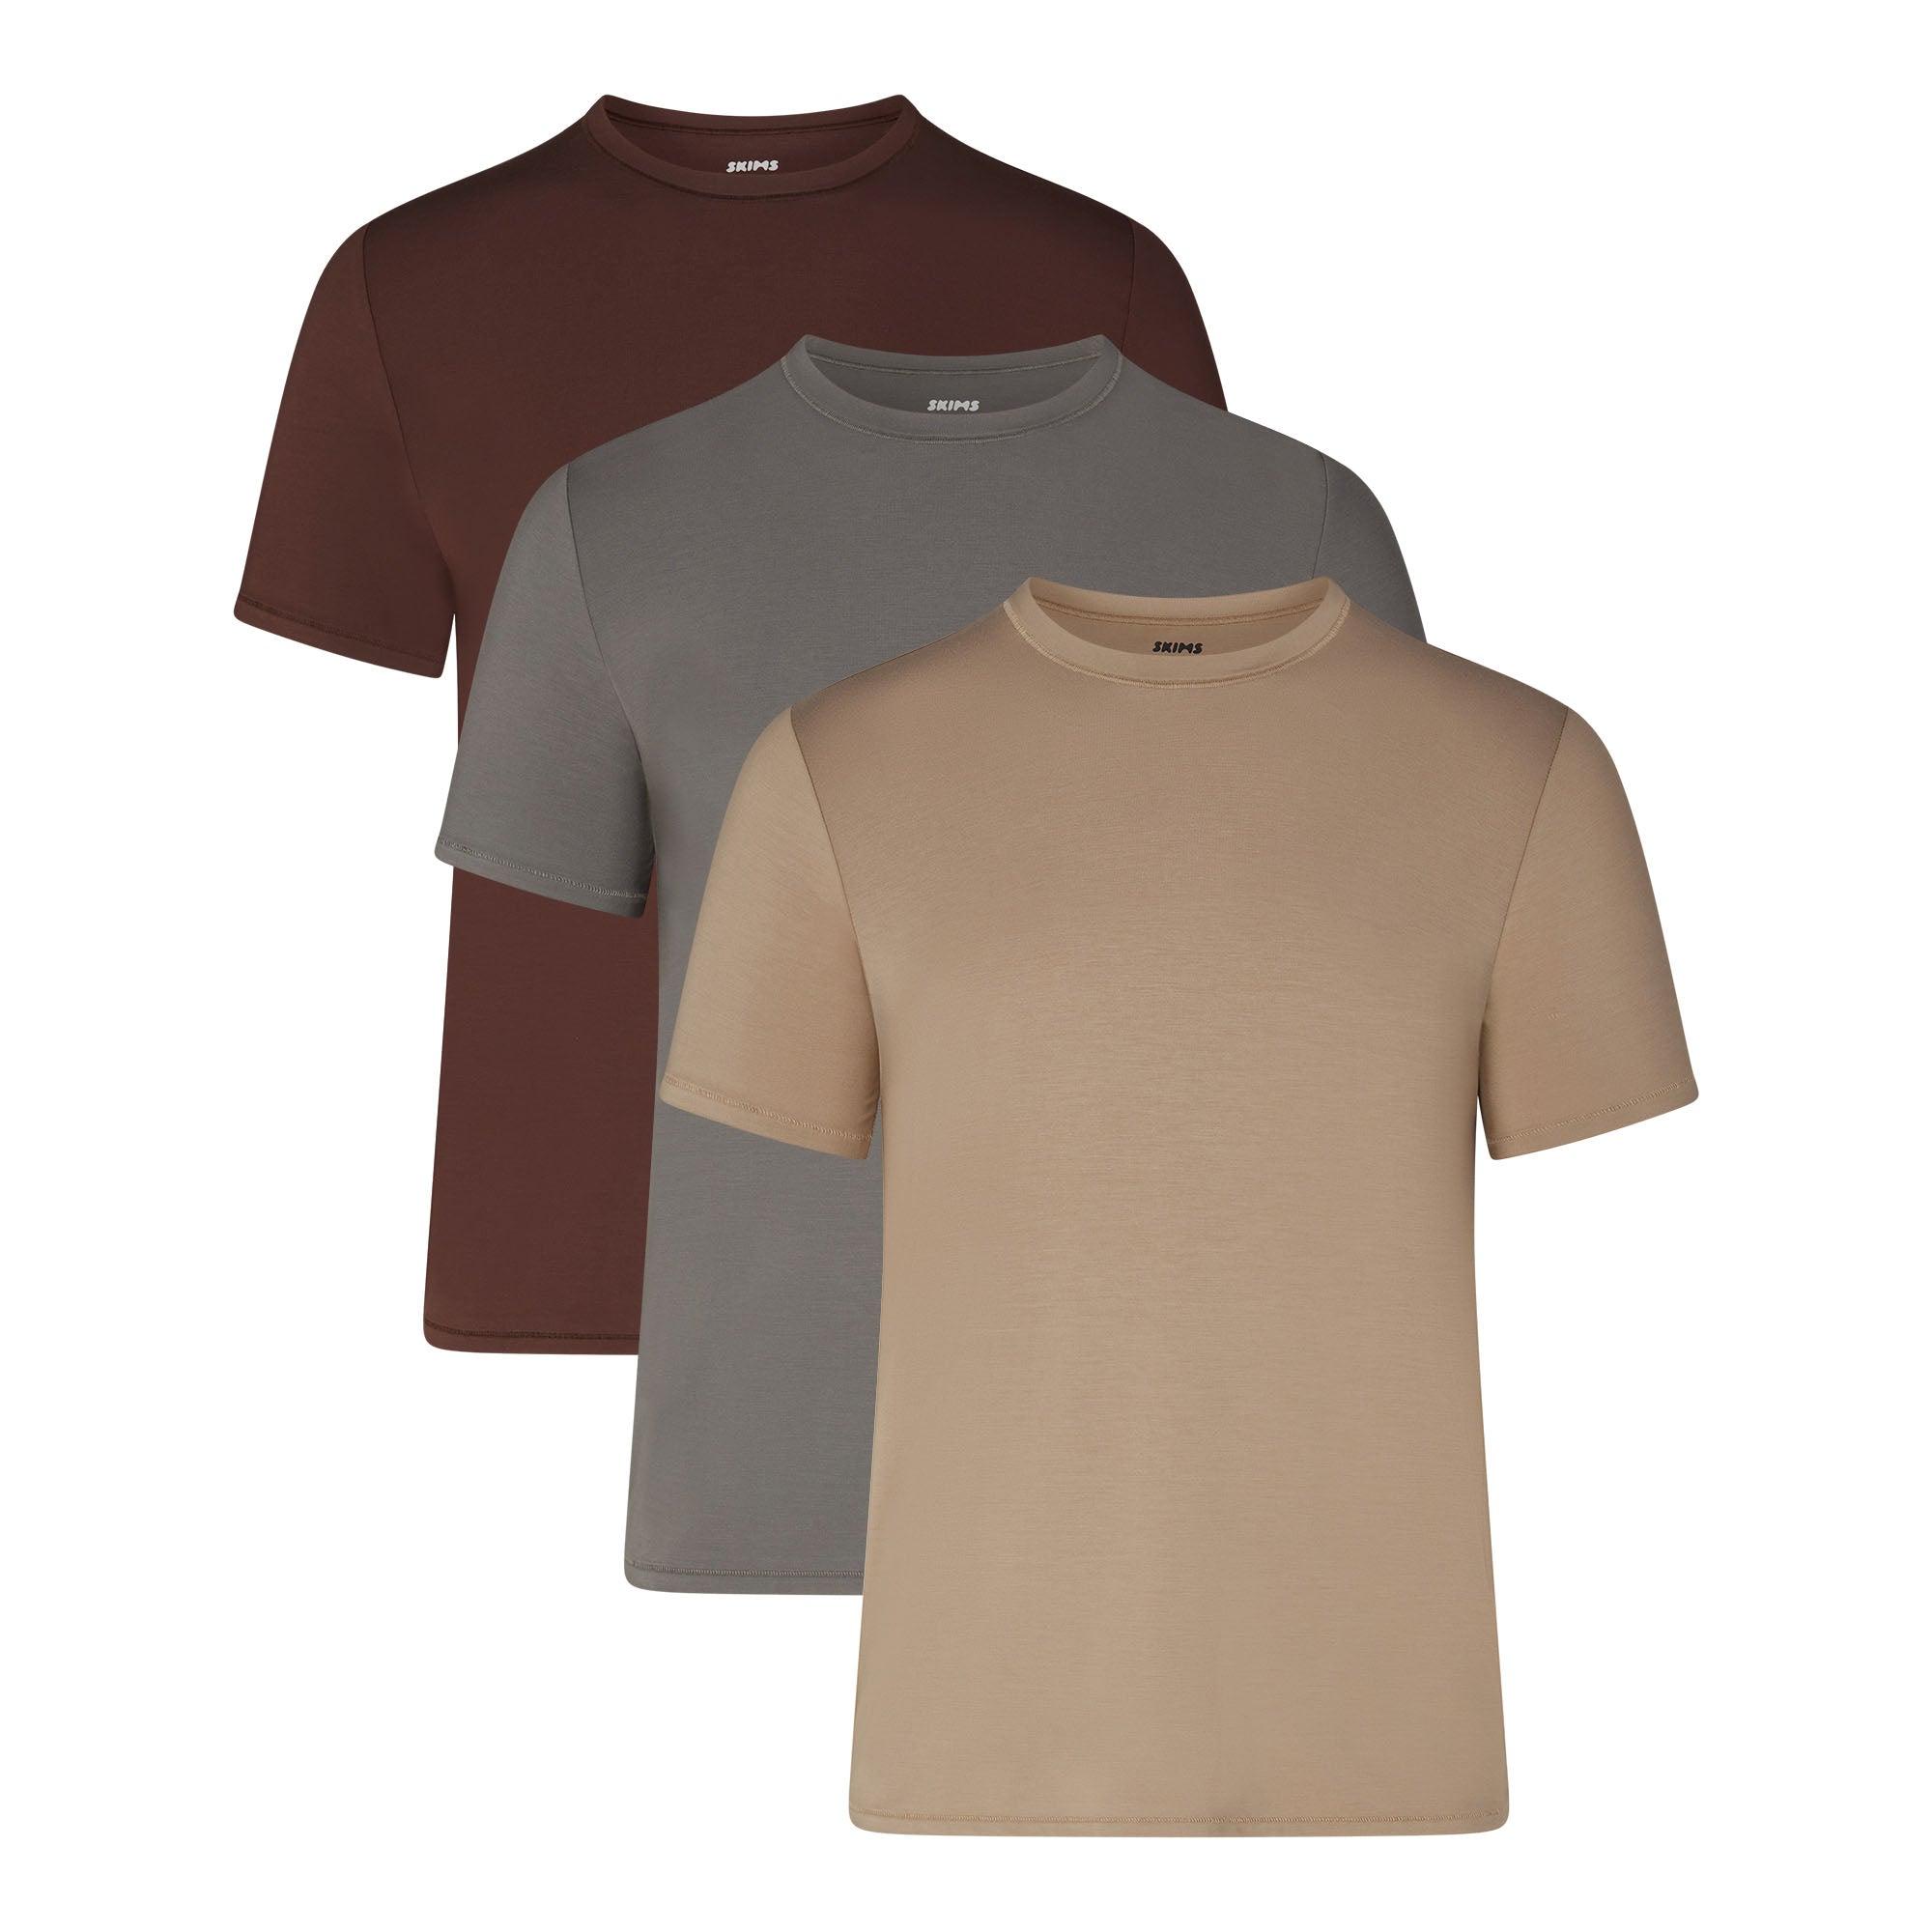 Skims 3-pack T-shirt in Brown for Men